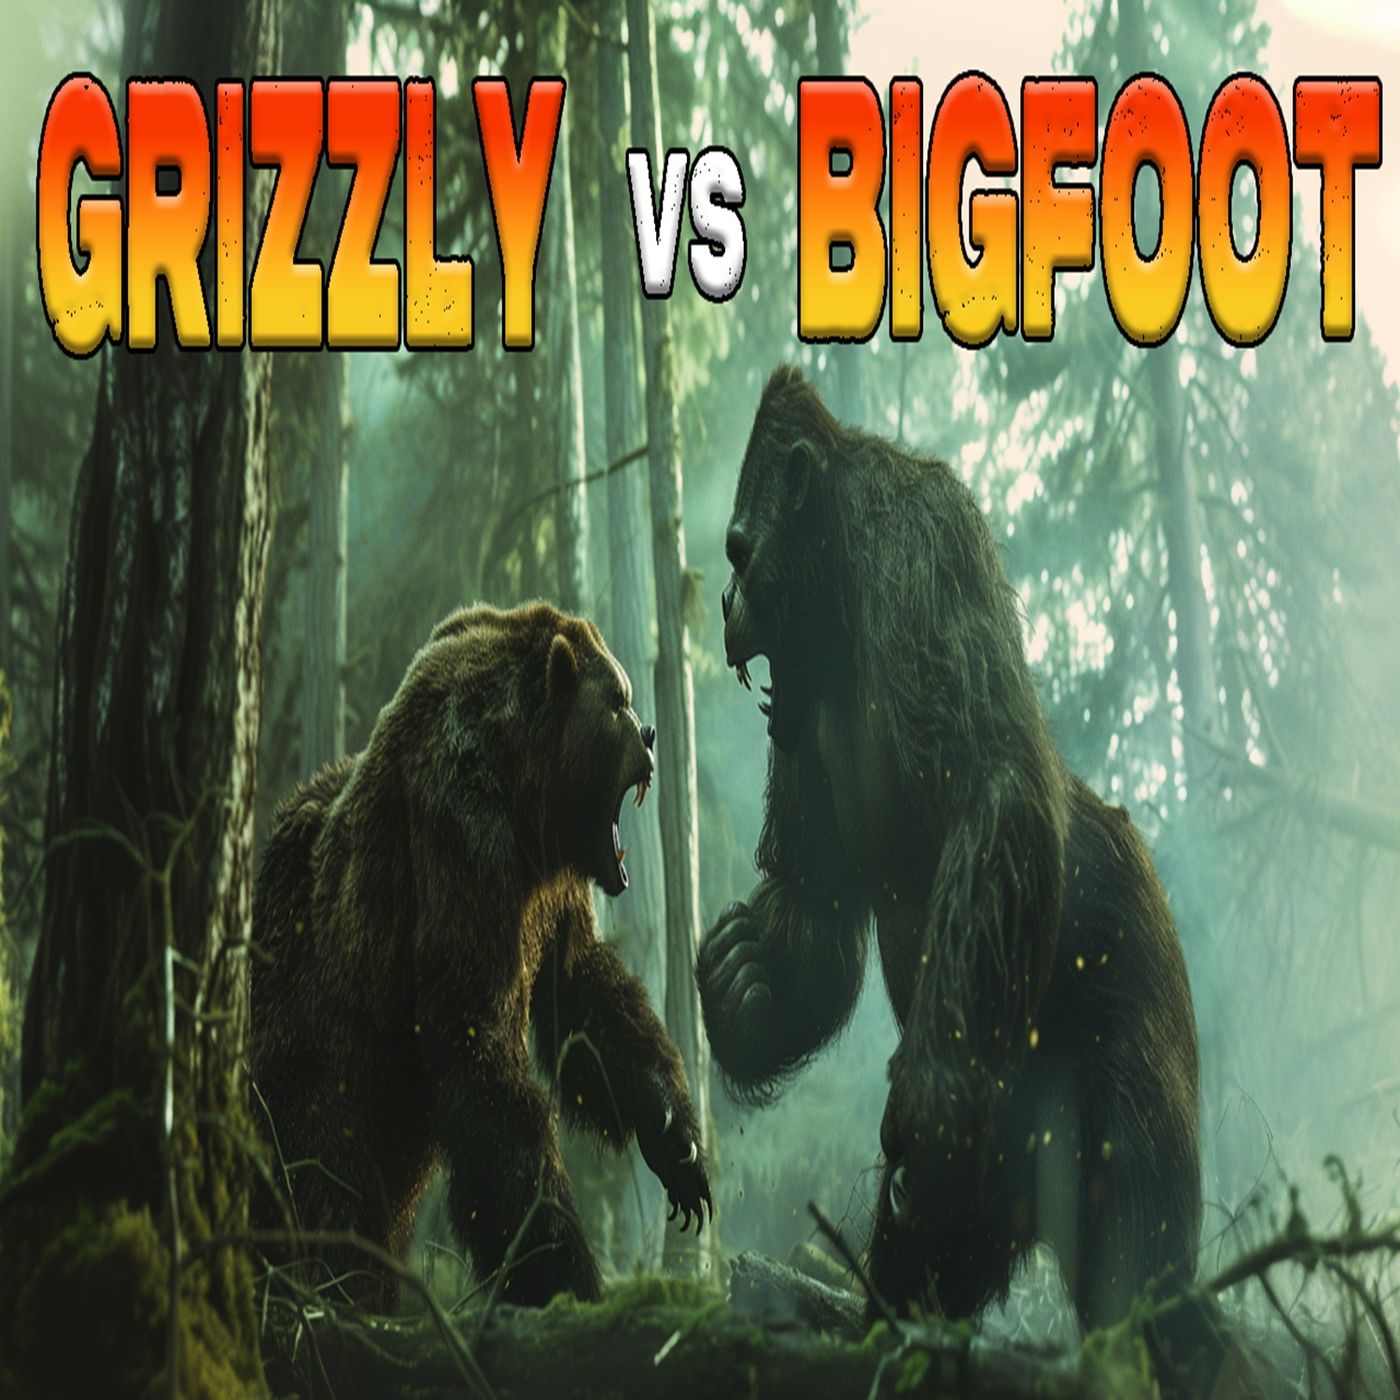 Bigfoot vs Grizzly